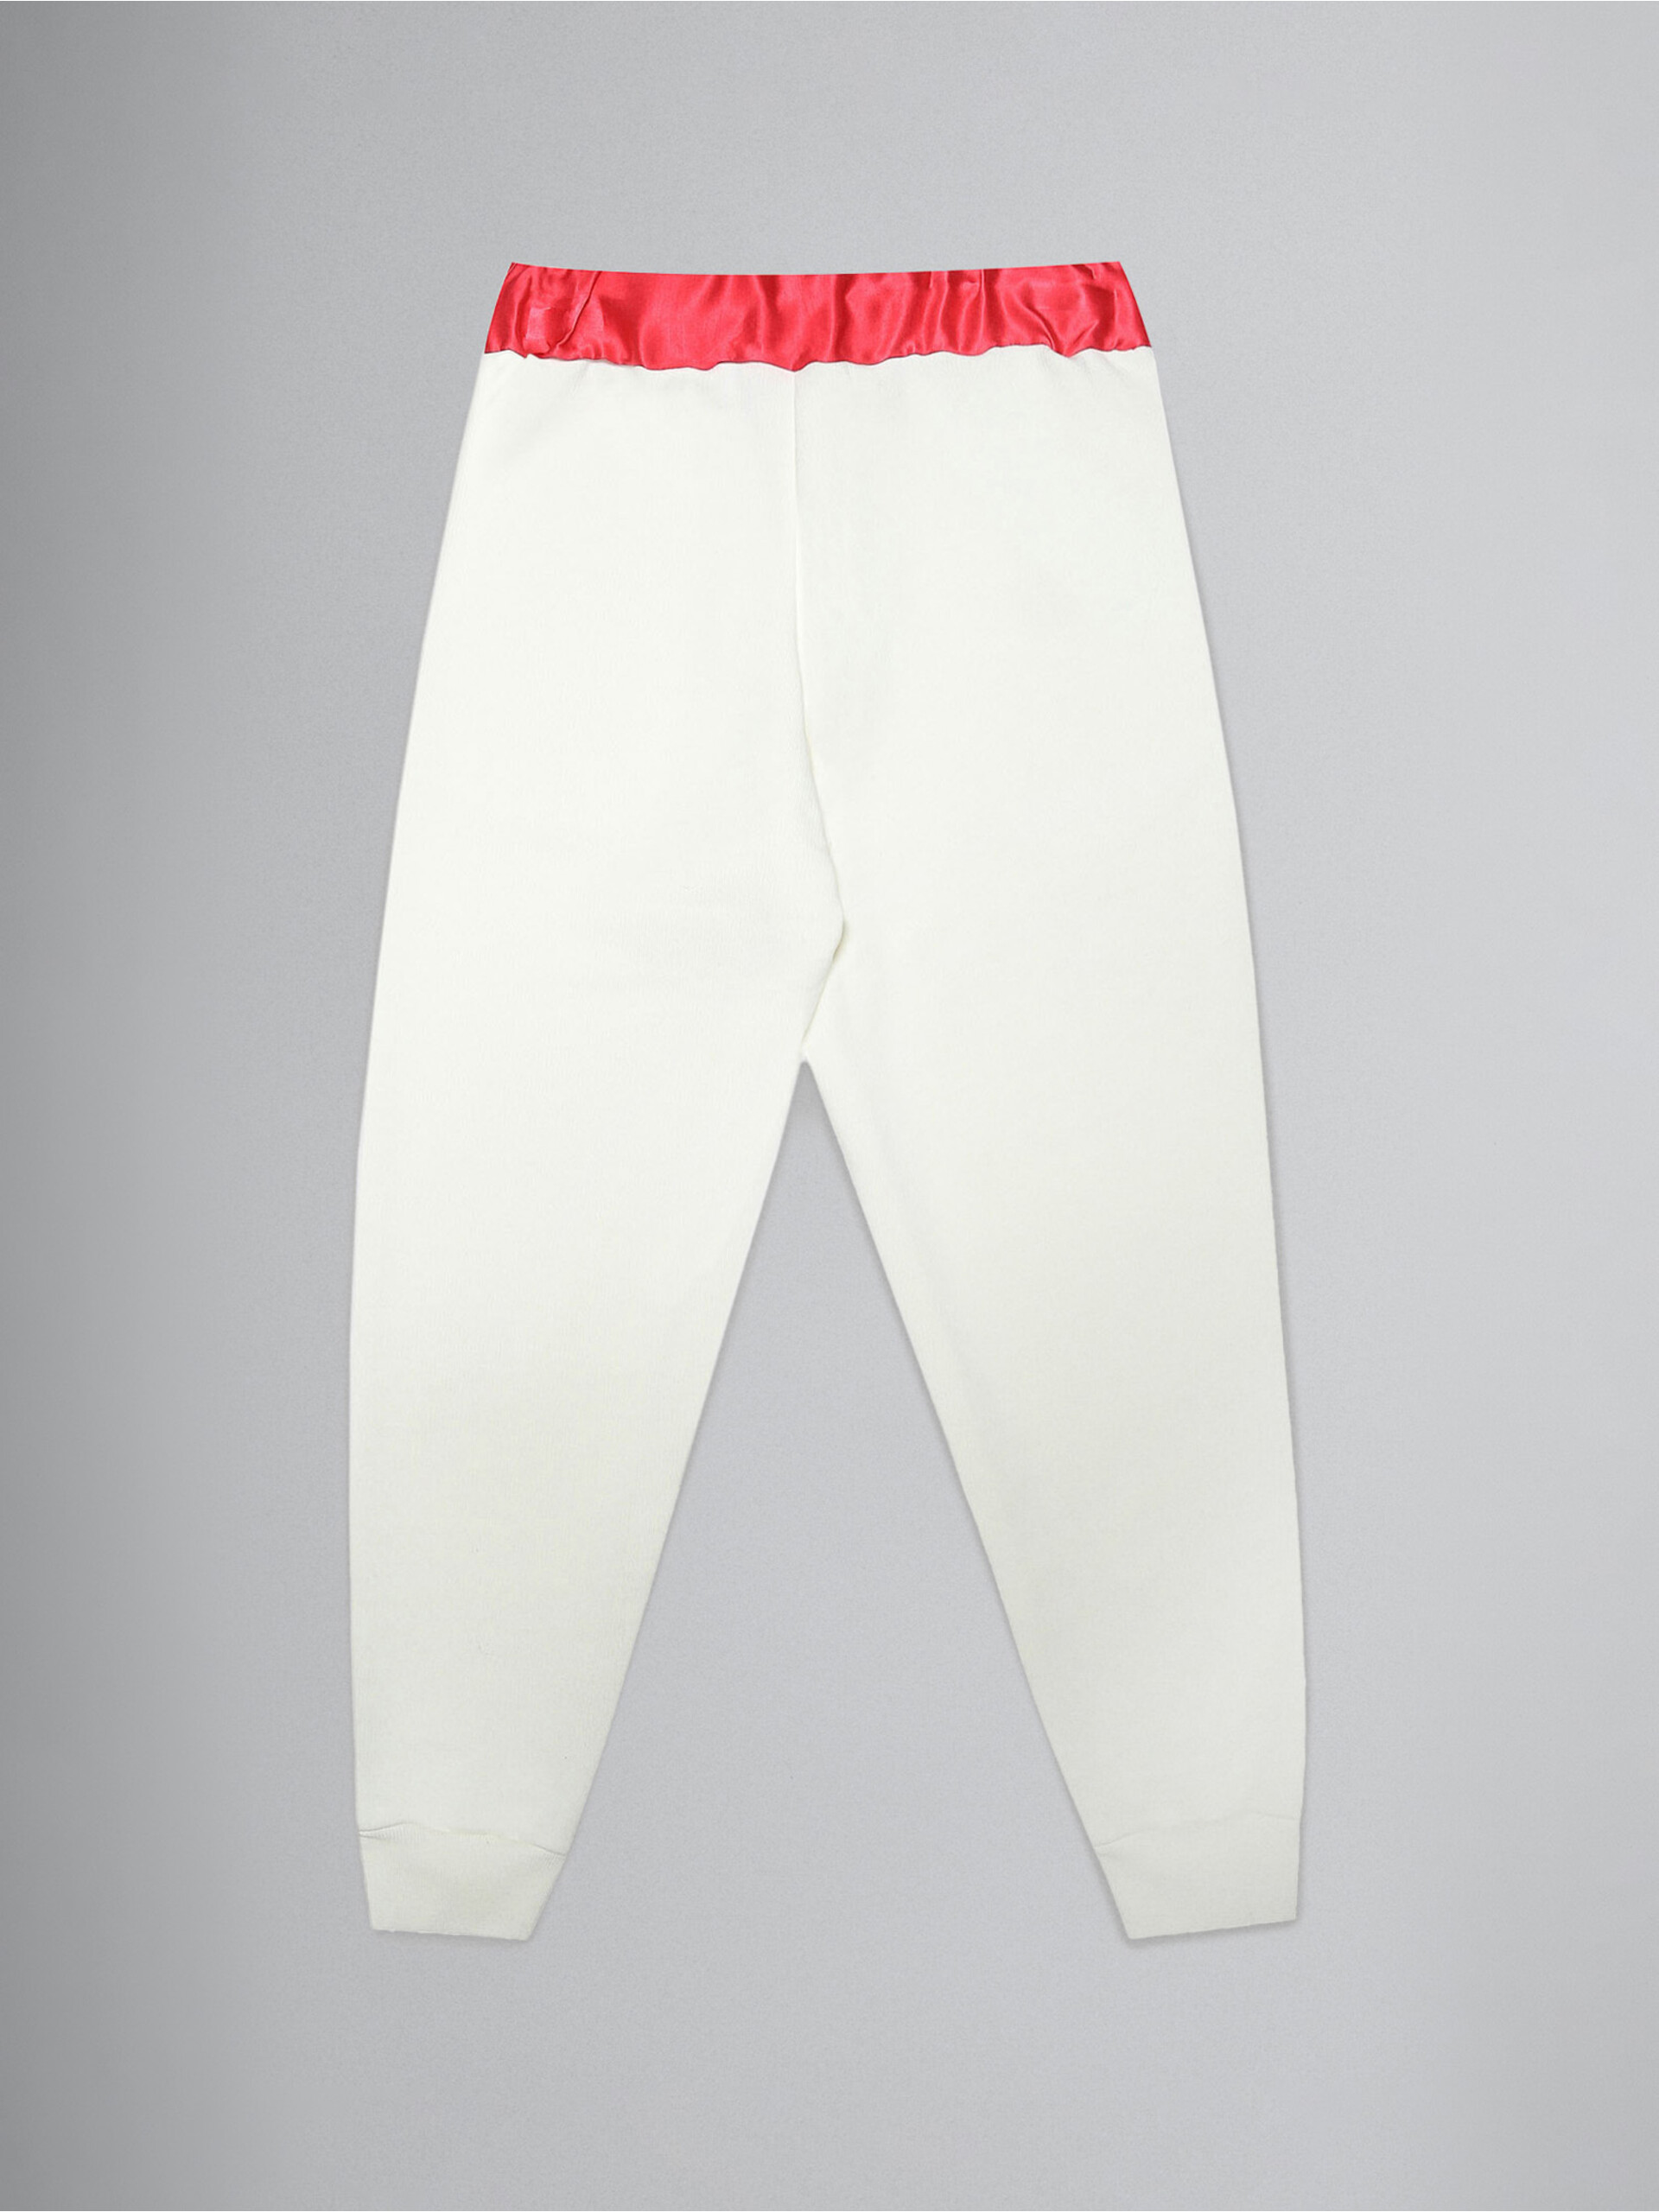 White French terry track pants with sequin "M" patch - Pants - Image 2